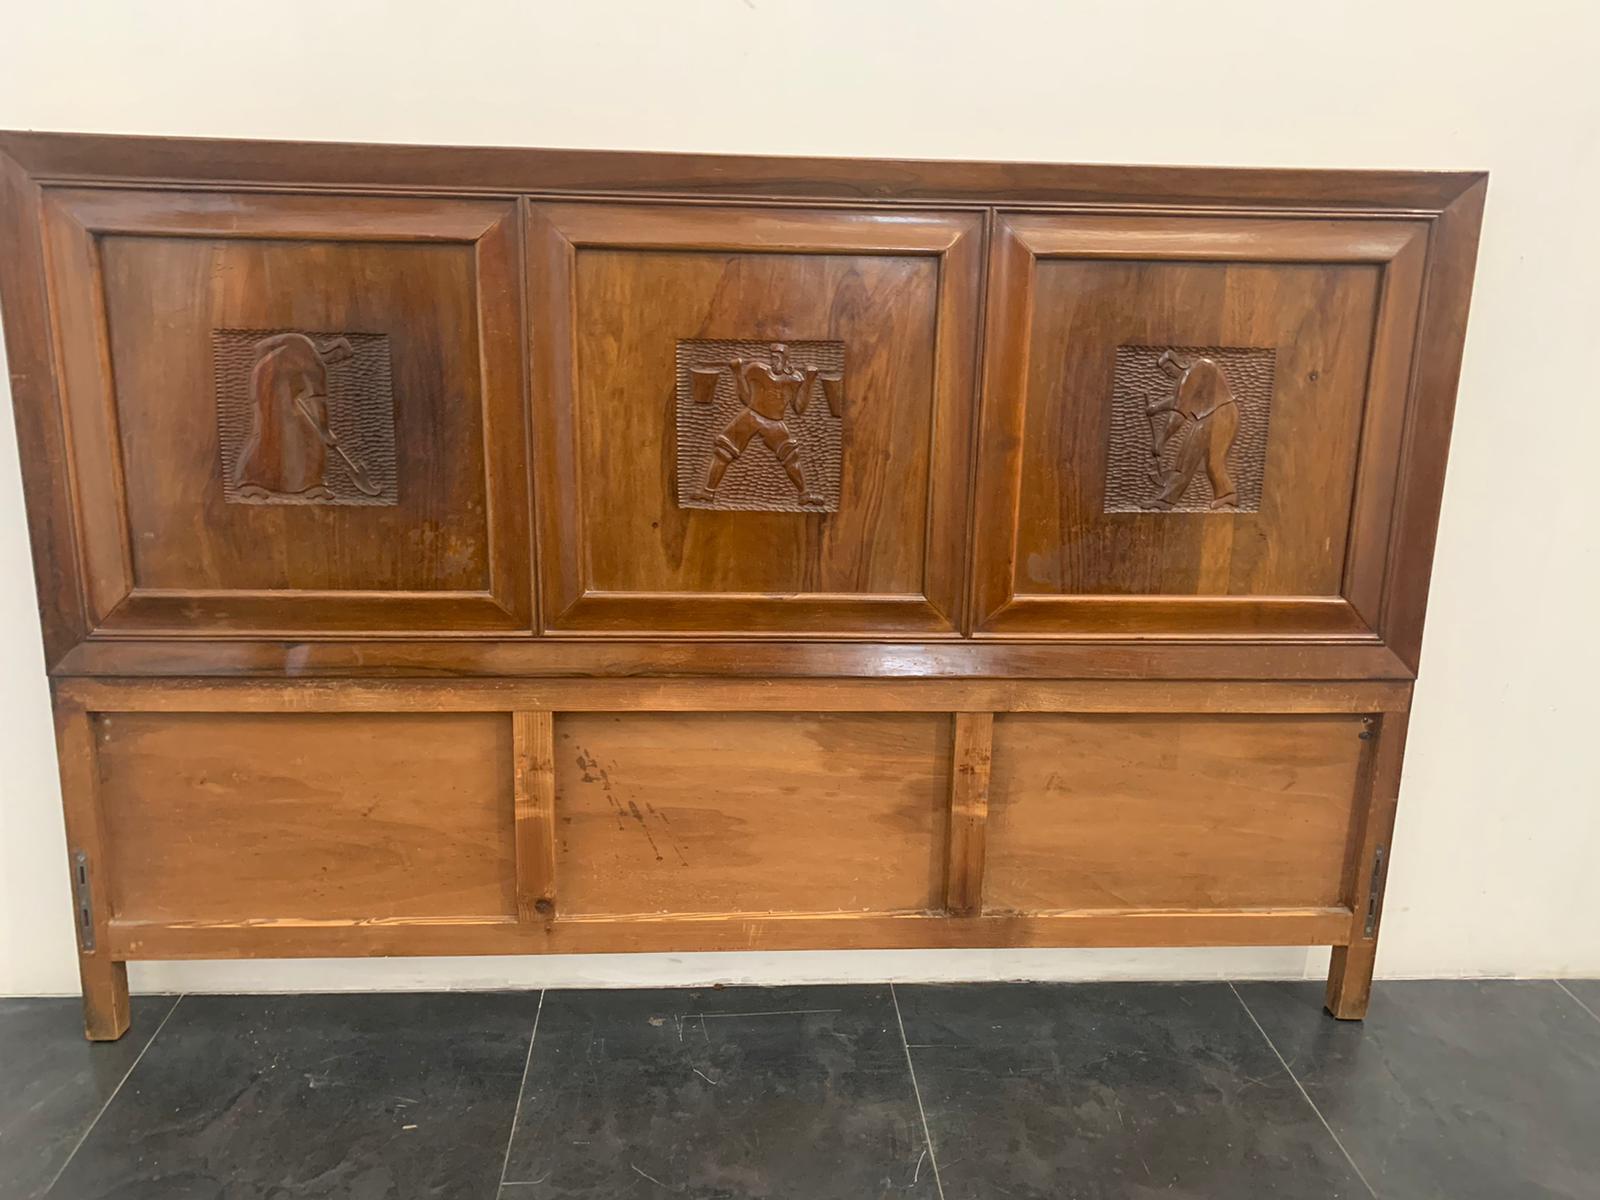 Headboard part of a bed of great quality solid walnut it presents 3 panels carved with futuristic characters on a gouged background. The design, the type of carving reconnect the type of Marelli and Colico. 
The footboard is not available, there